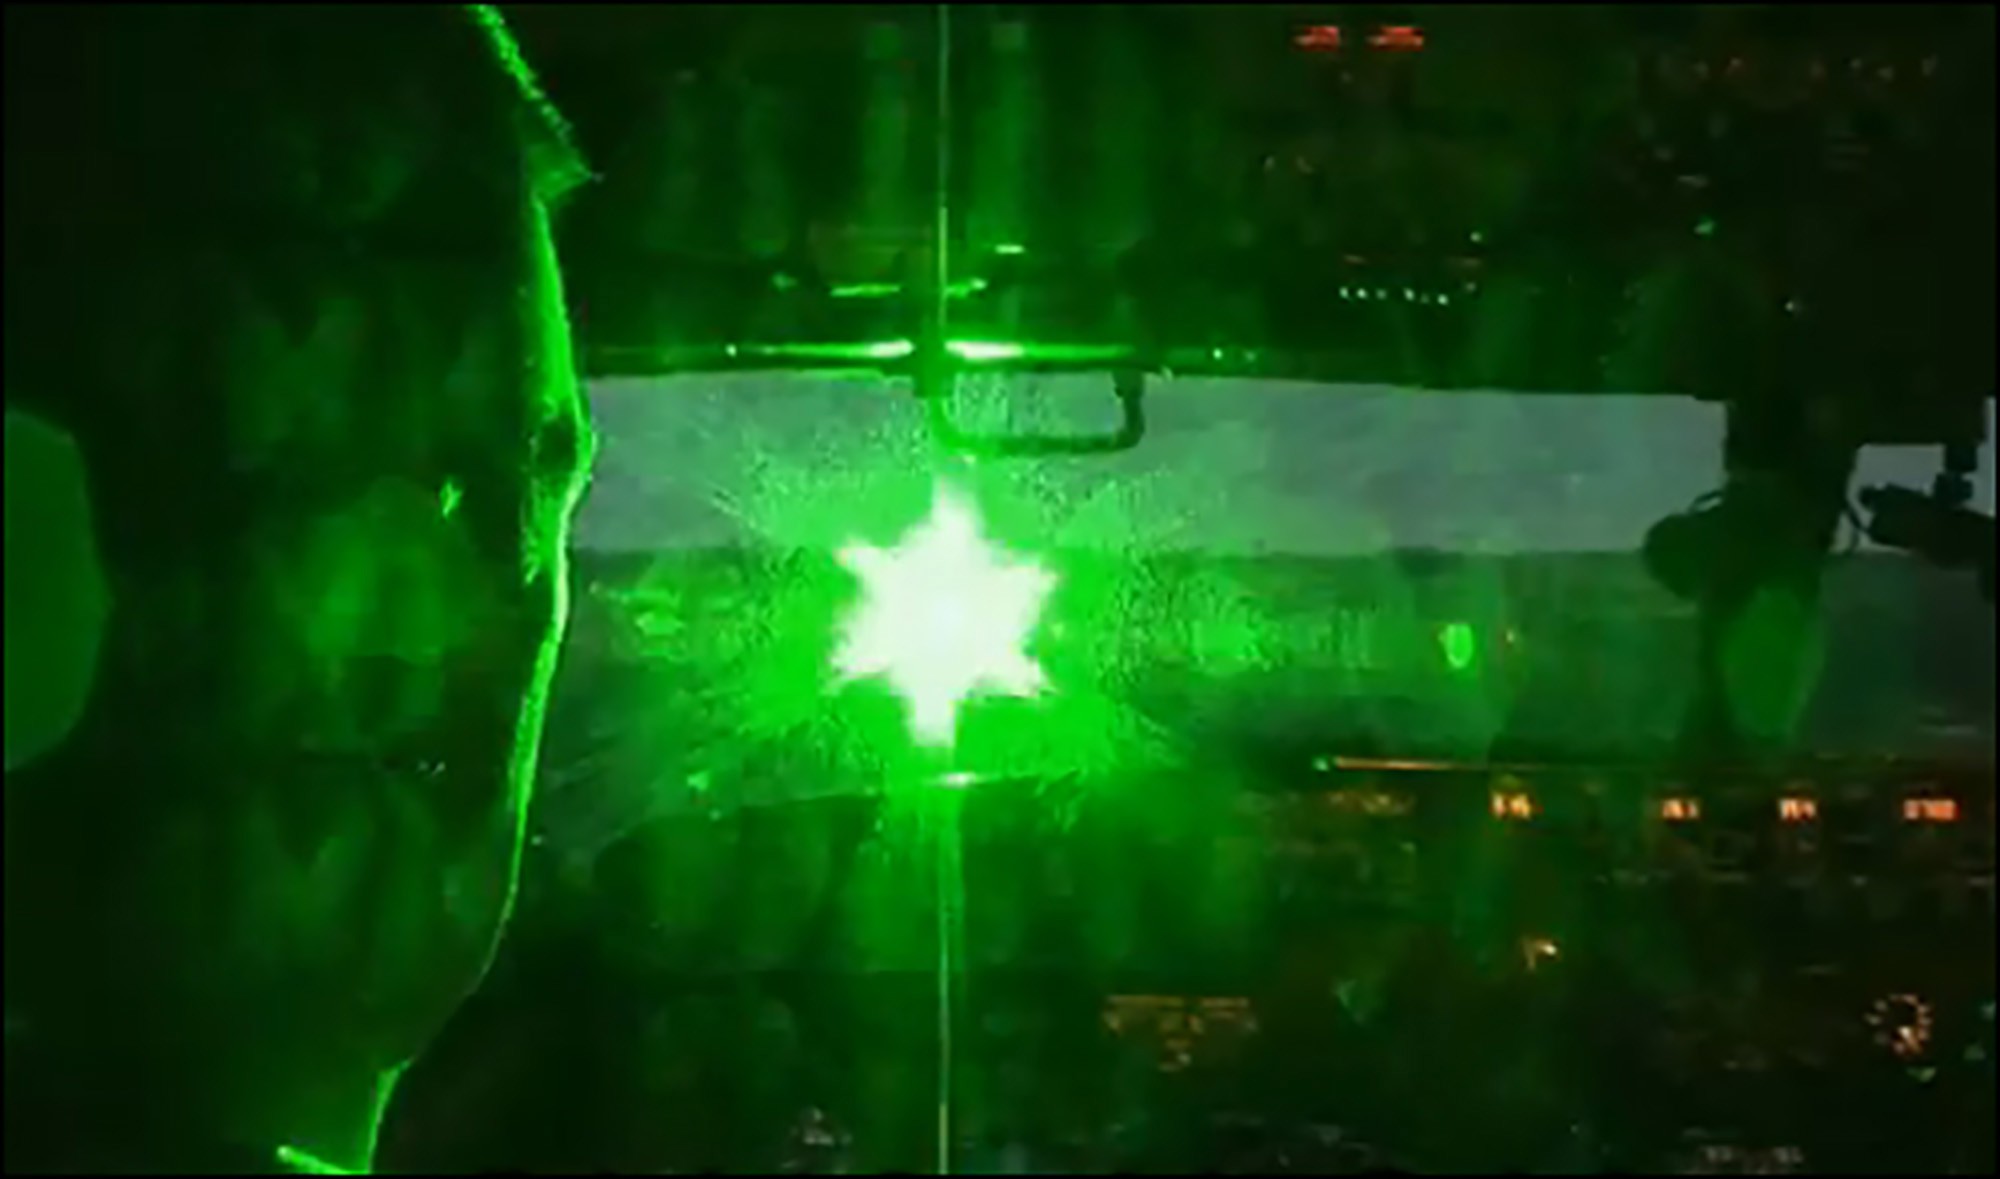 Lawmaker aims for law against laser strikes on aircraft \u2013 Cronkite News